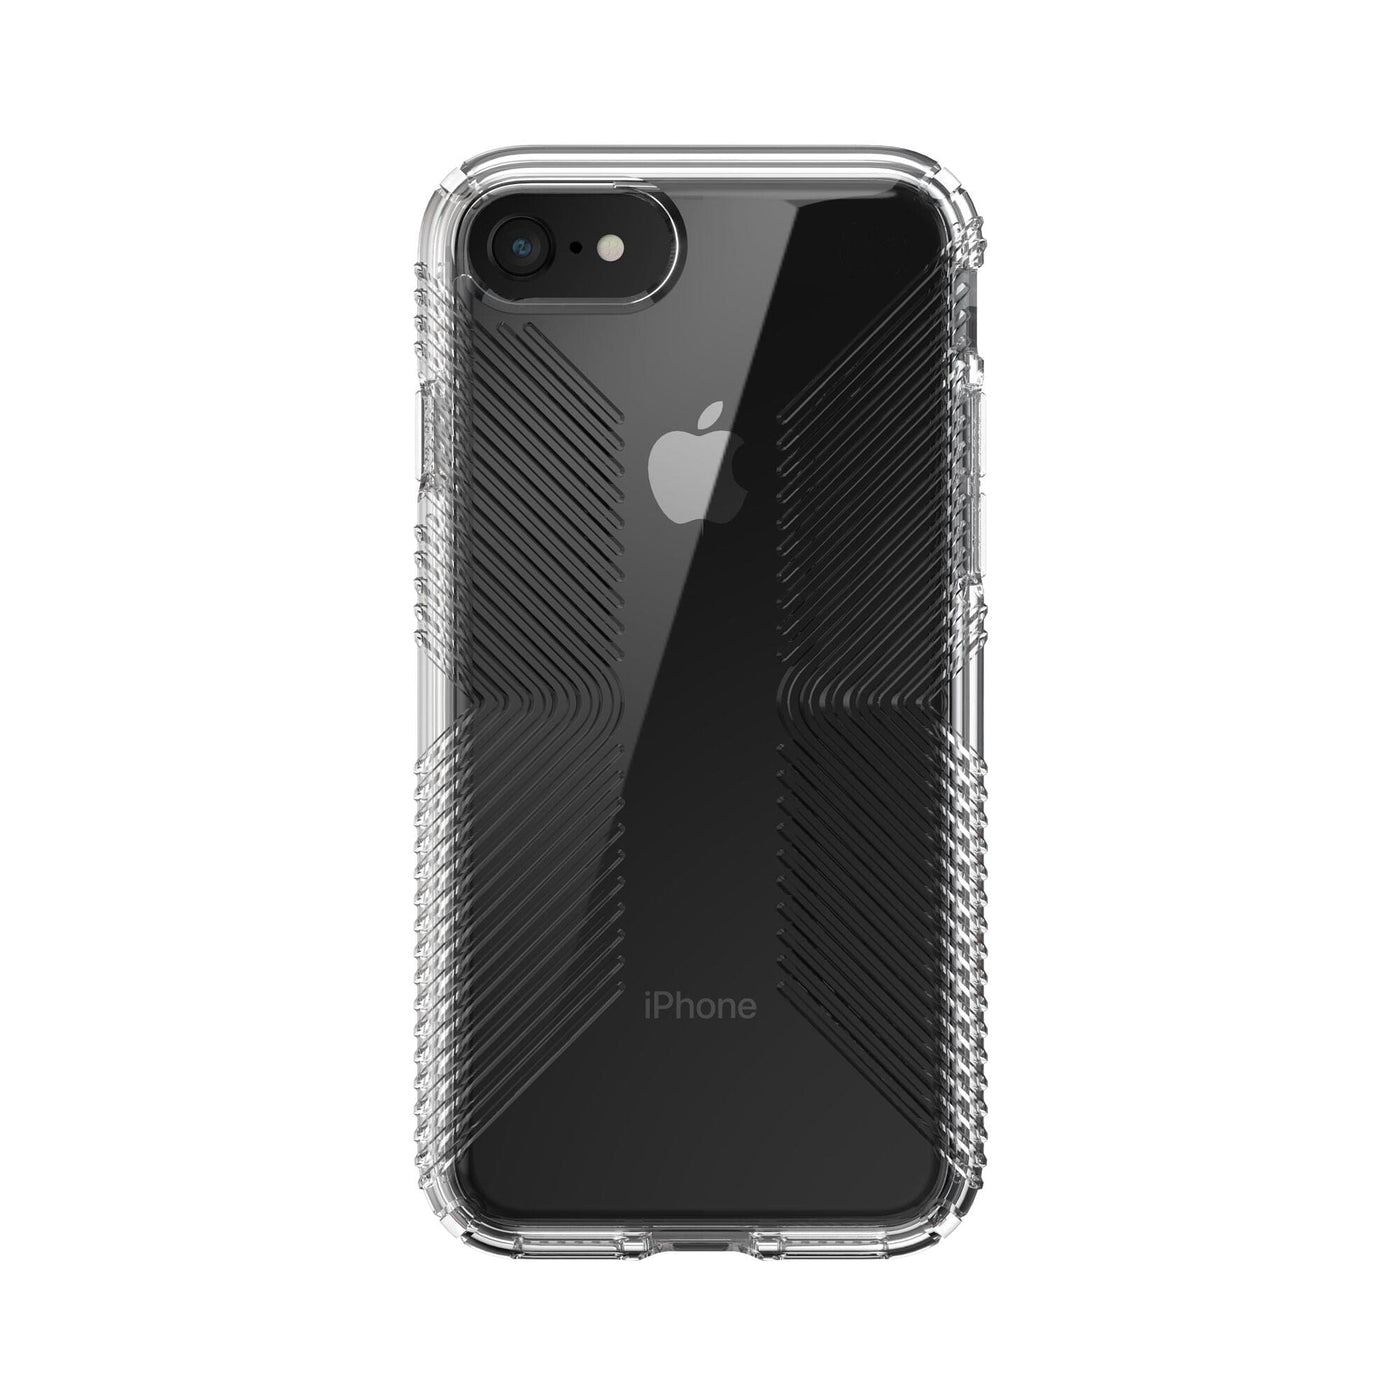 Best iPhone 8 and iPhone 8 Plus Cases of 2020